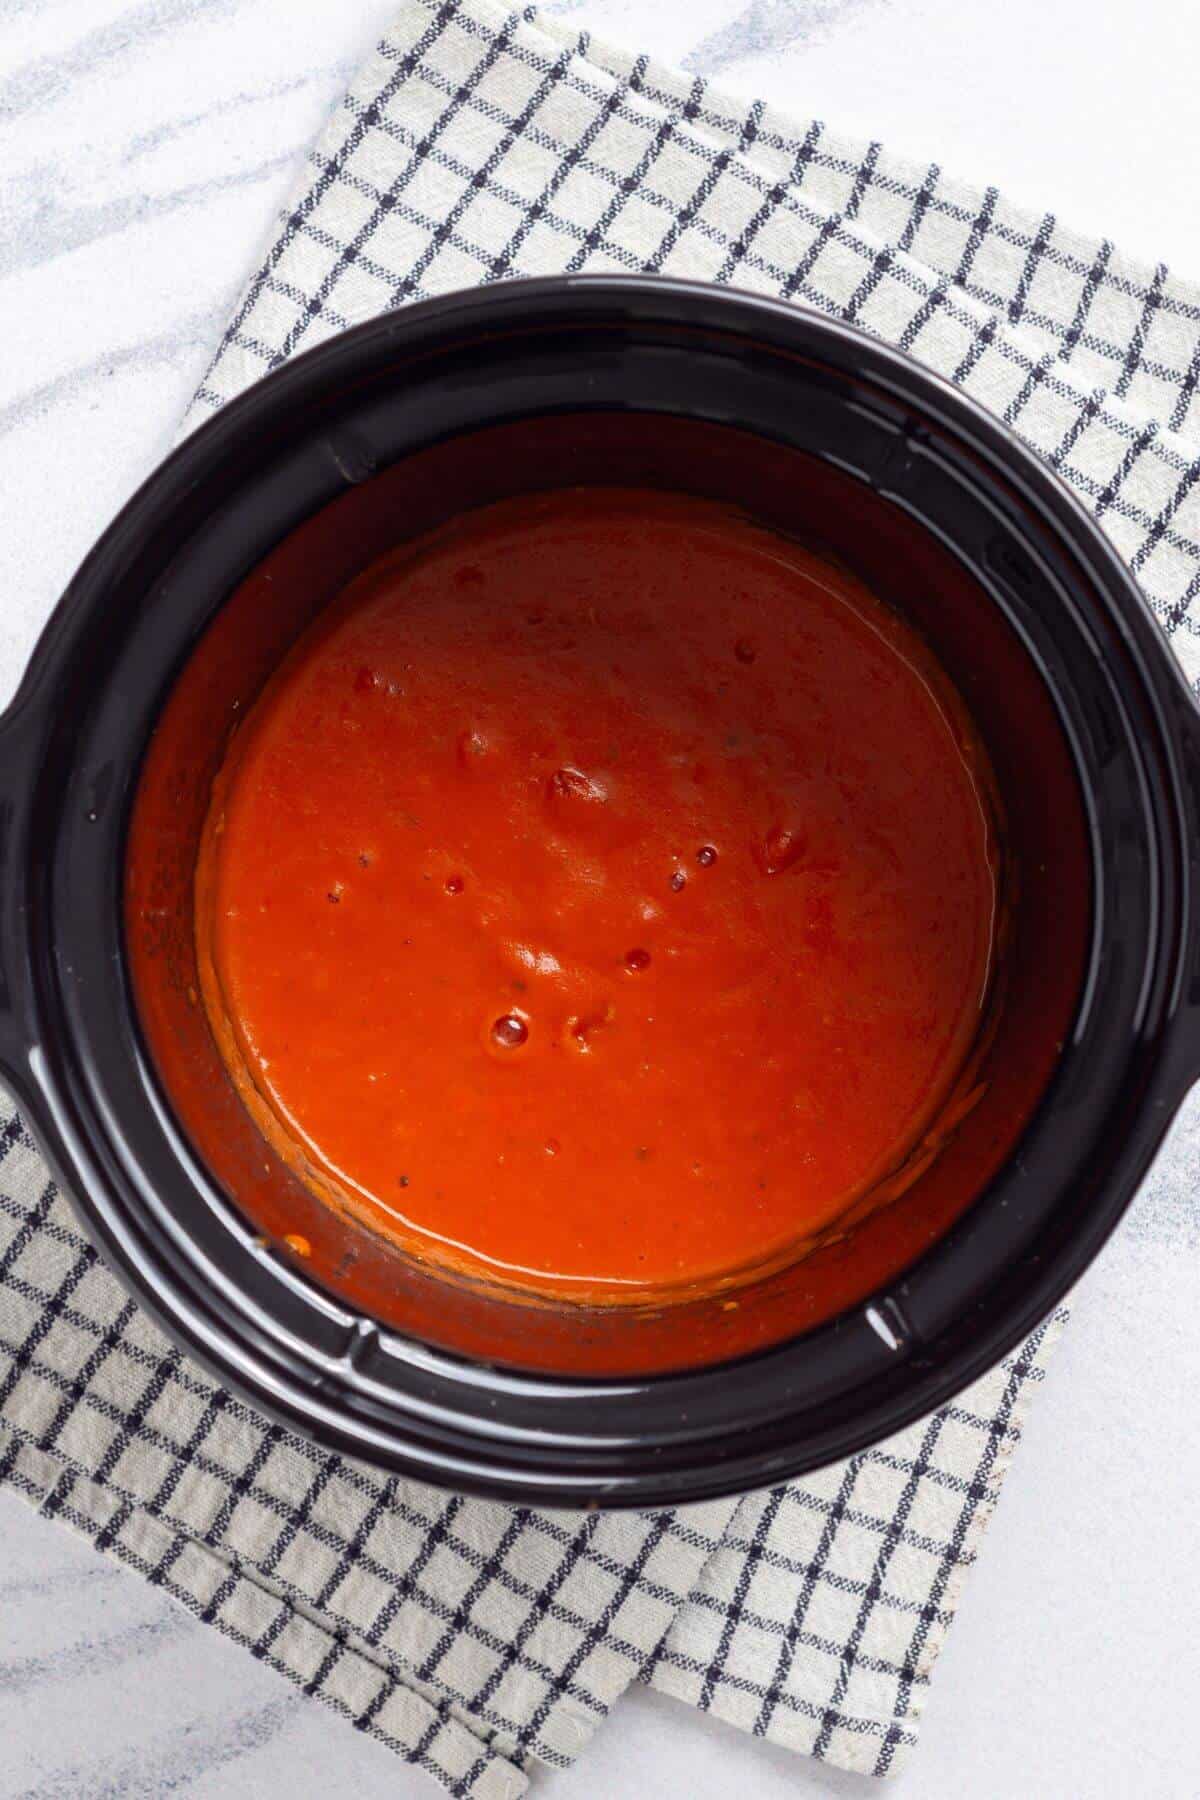 Tomato soup in a black slow cooker on a checkered cloth.